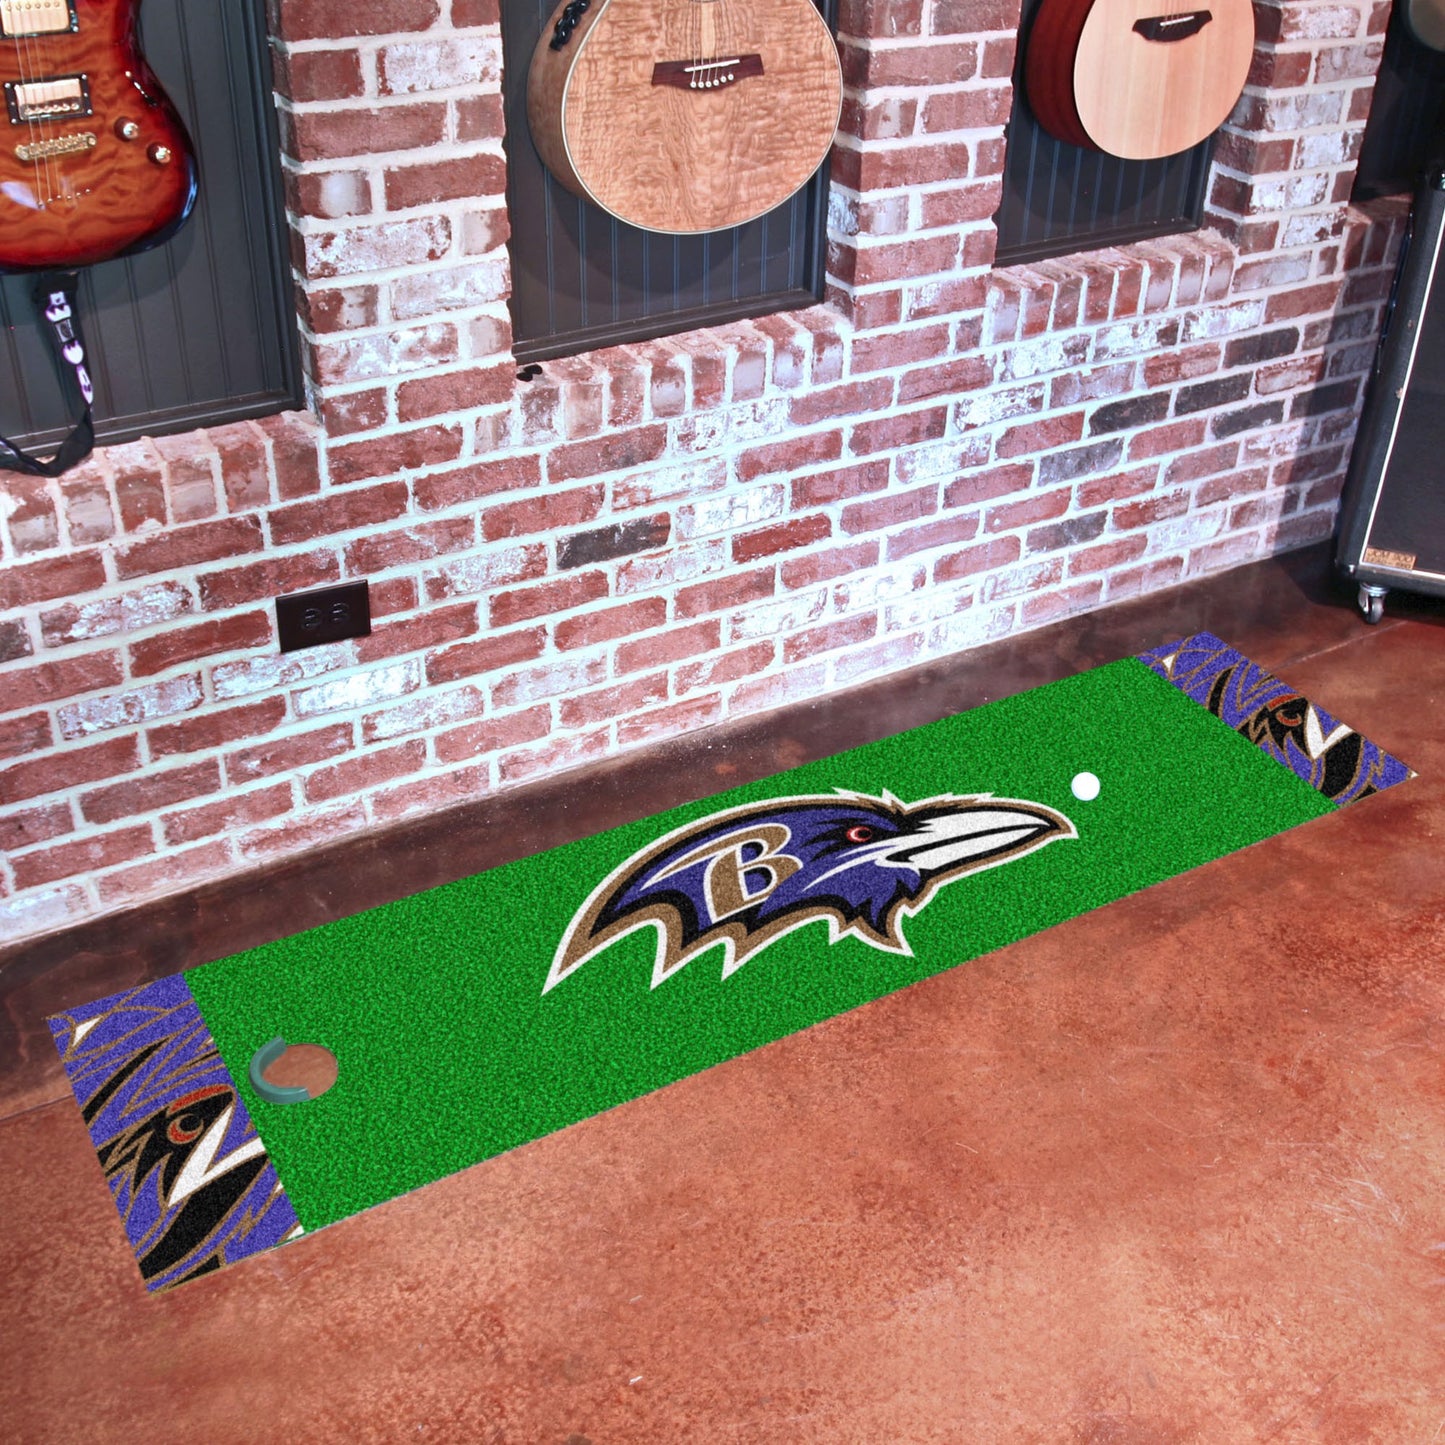 Baltimore Ravens NFL x FIT Green Putting Mat by Fanmats